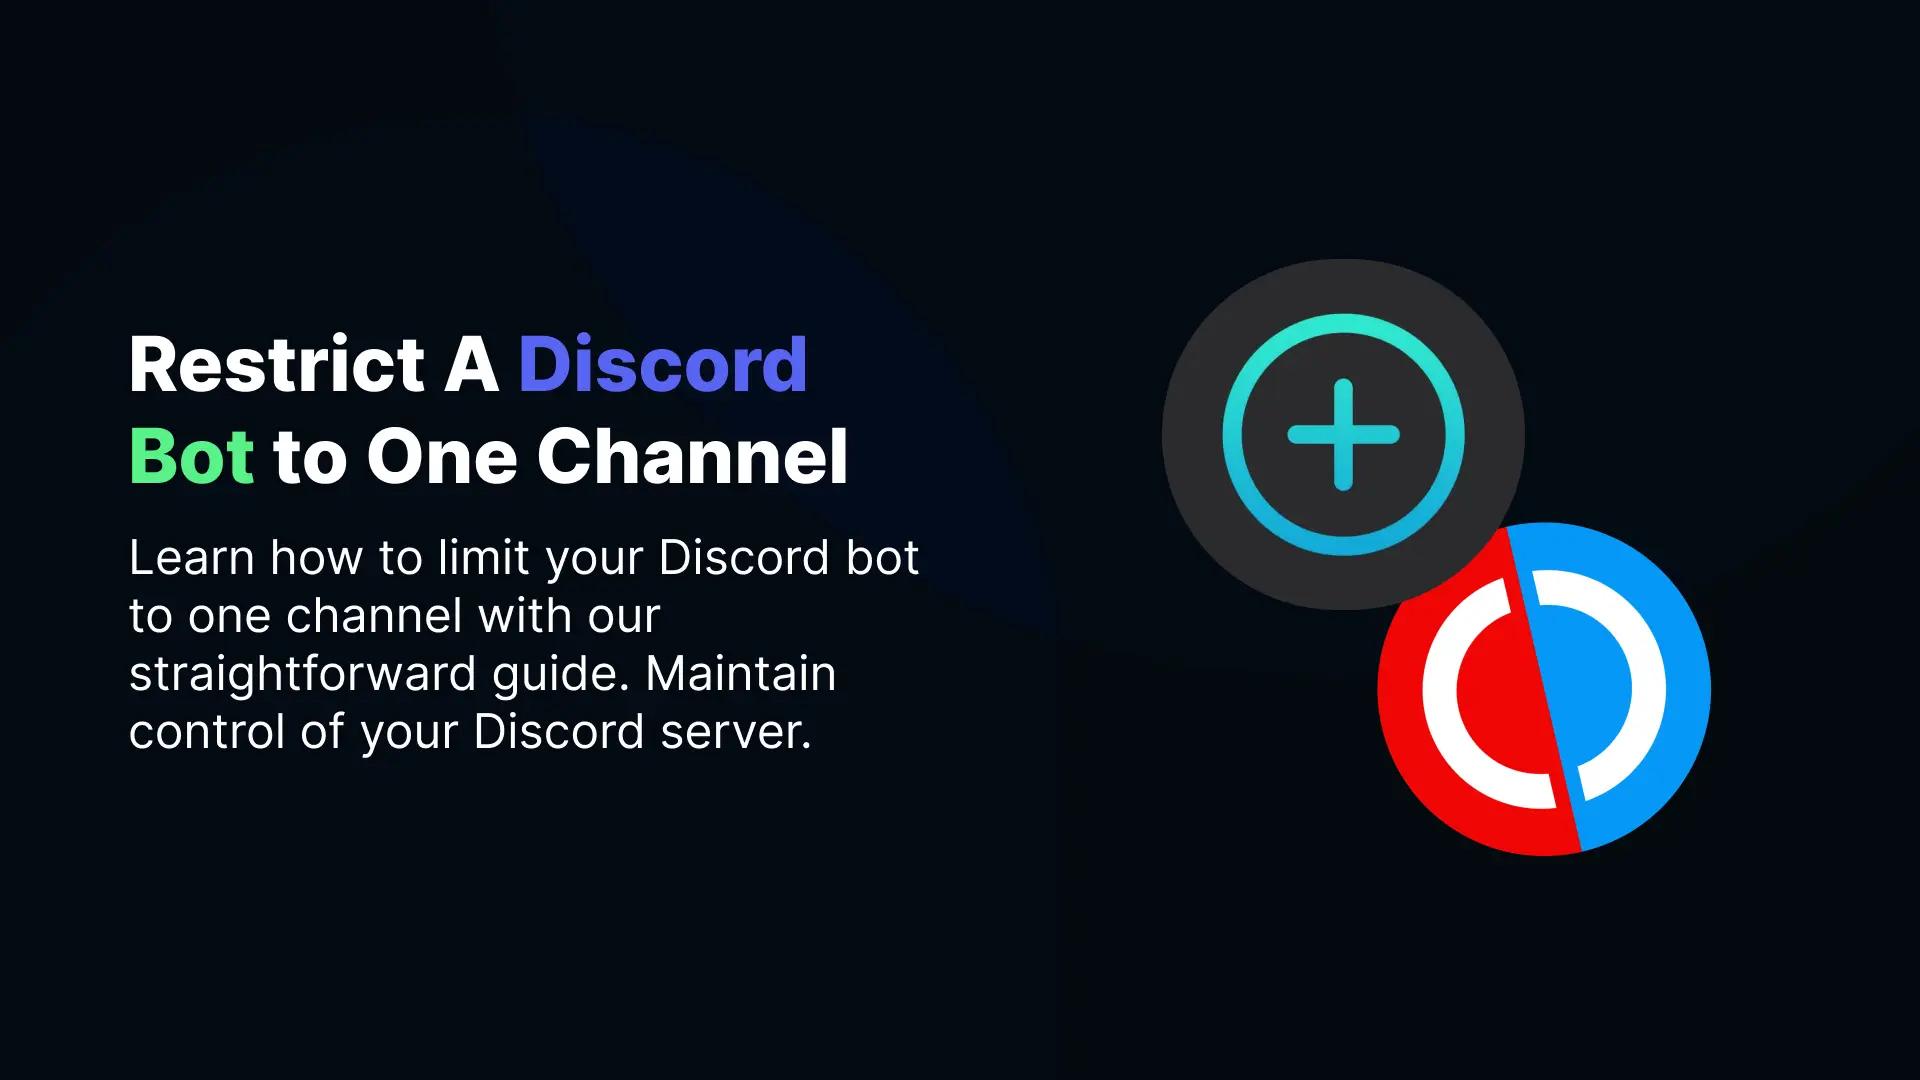 How to Restrict A Discord Bot to One Channel